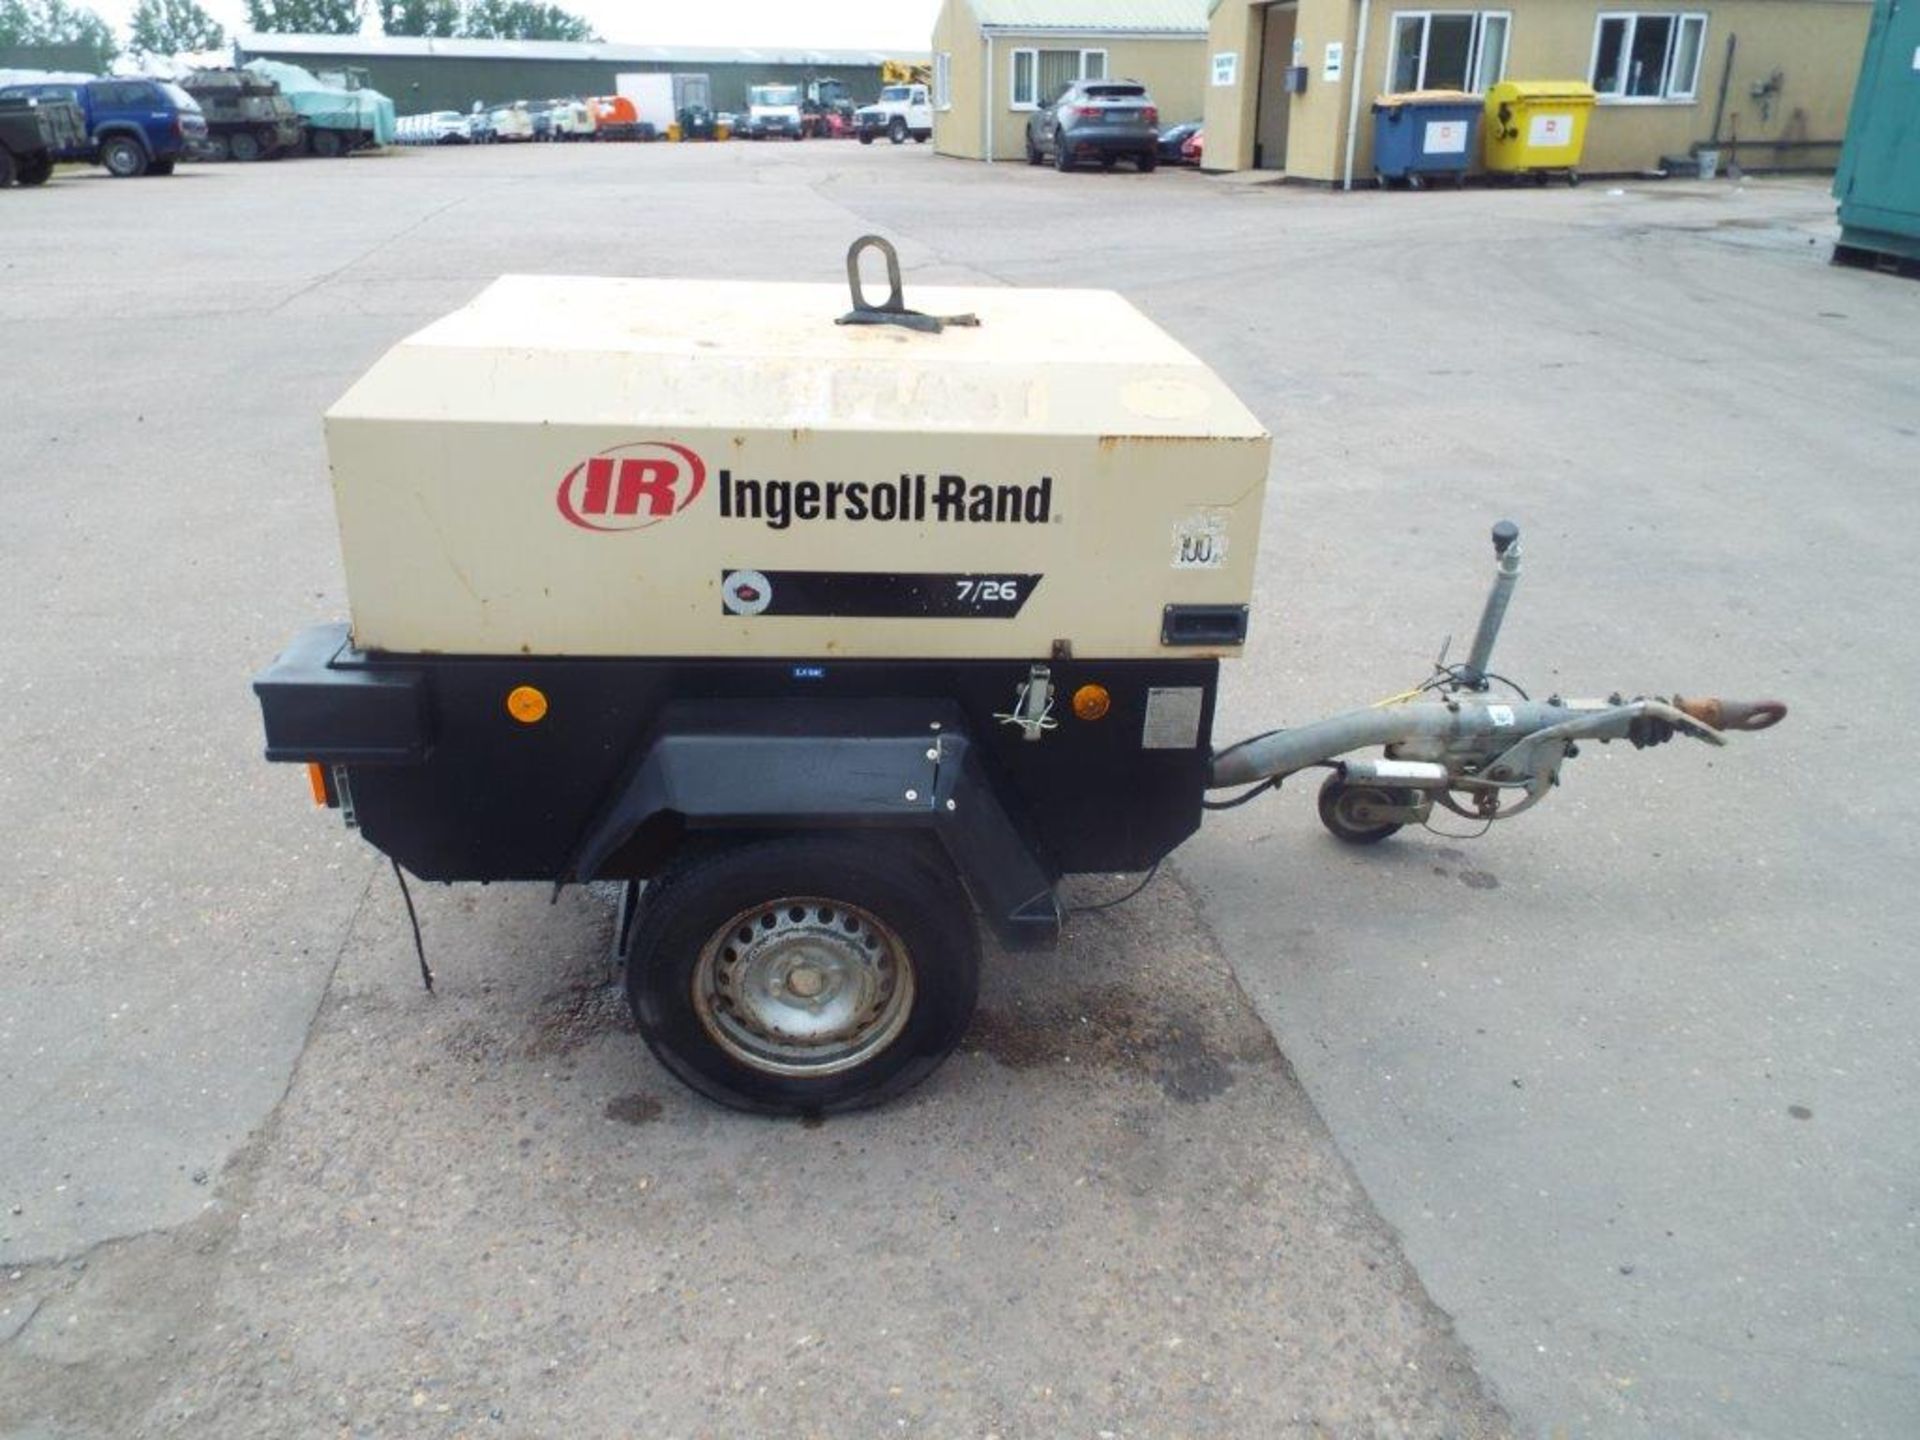 Ingersoll Rand 7/26 7 Bar Twin Tool Mobile Air Compressor - Image 6 of 18